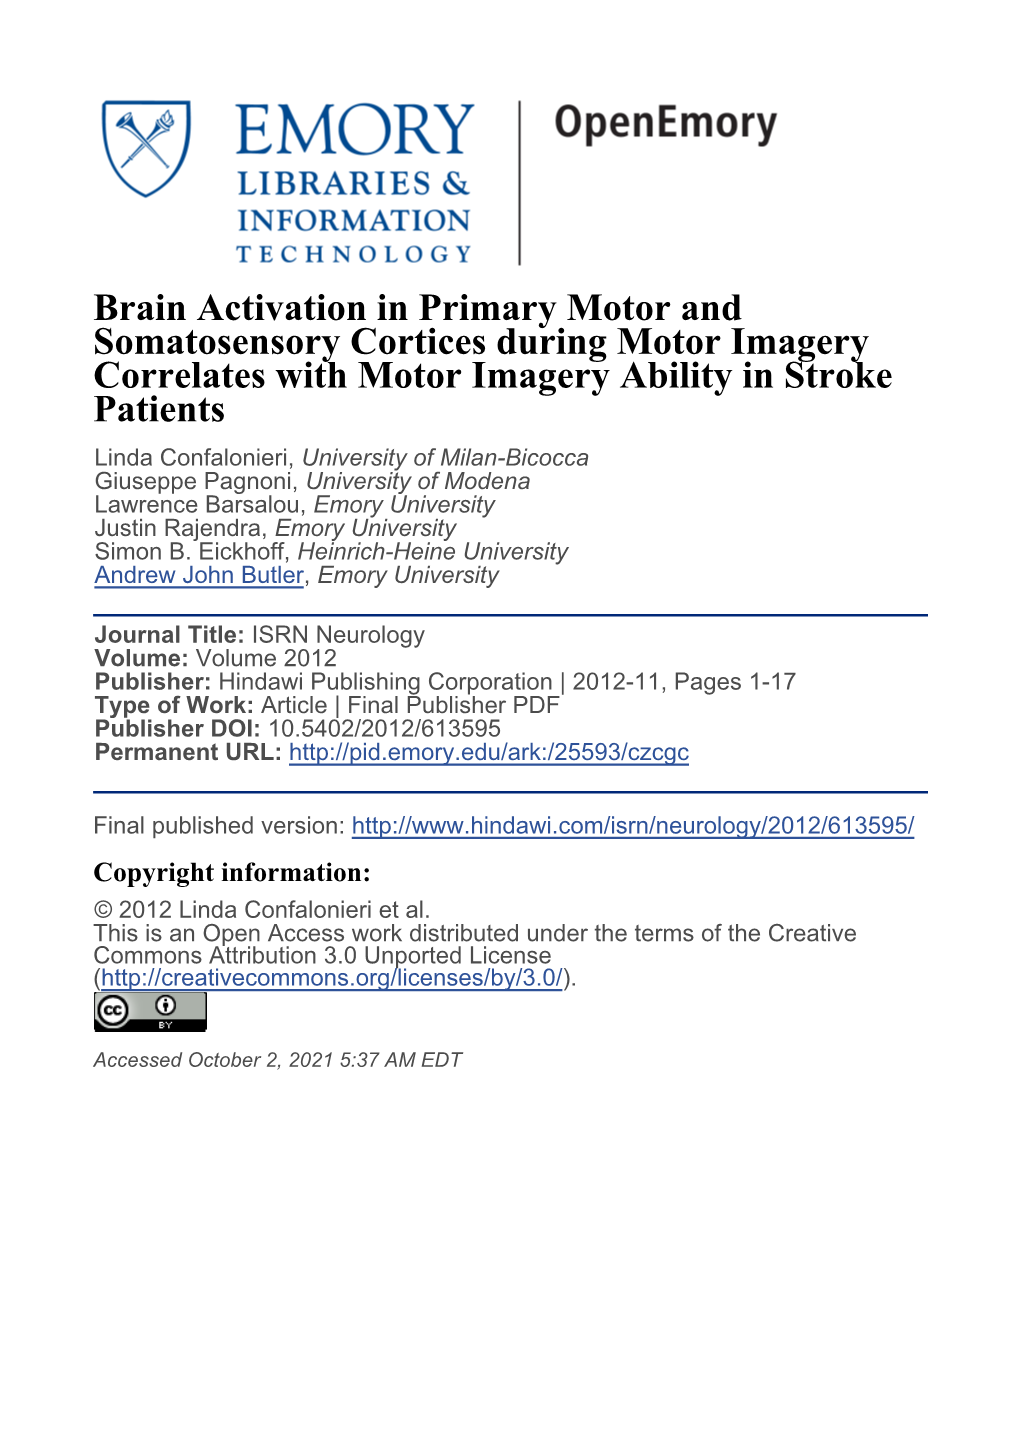 Brain Activation in Primary Motor and Somatosensory Cortices During Motor Imagery Correlates with Motor Imagery Ability in Strok